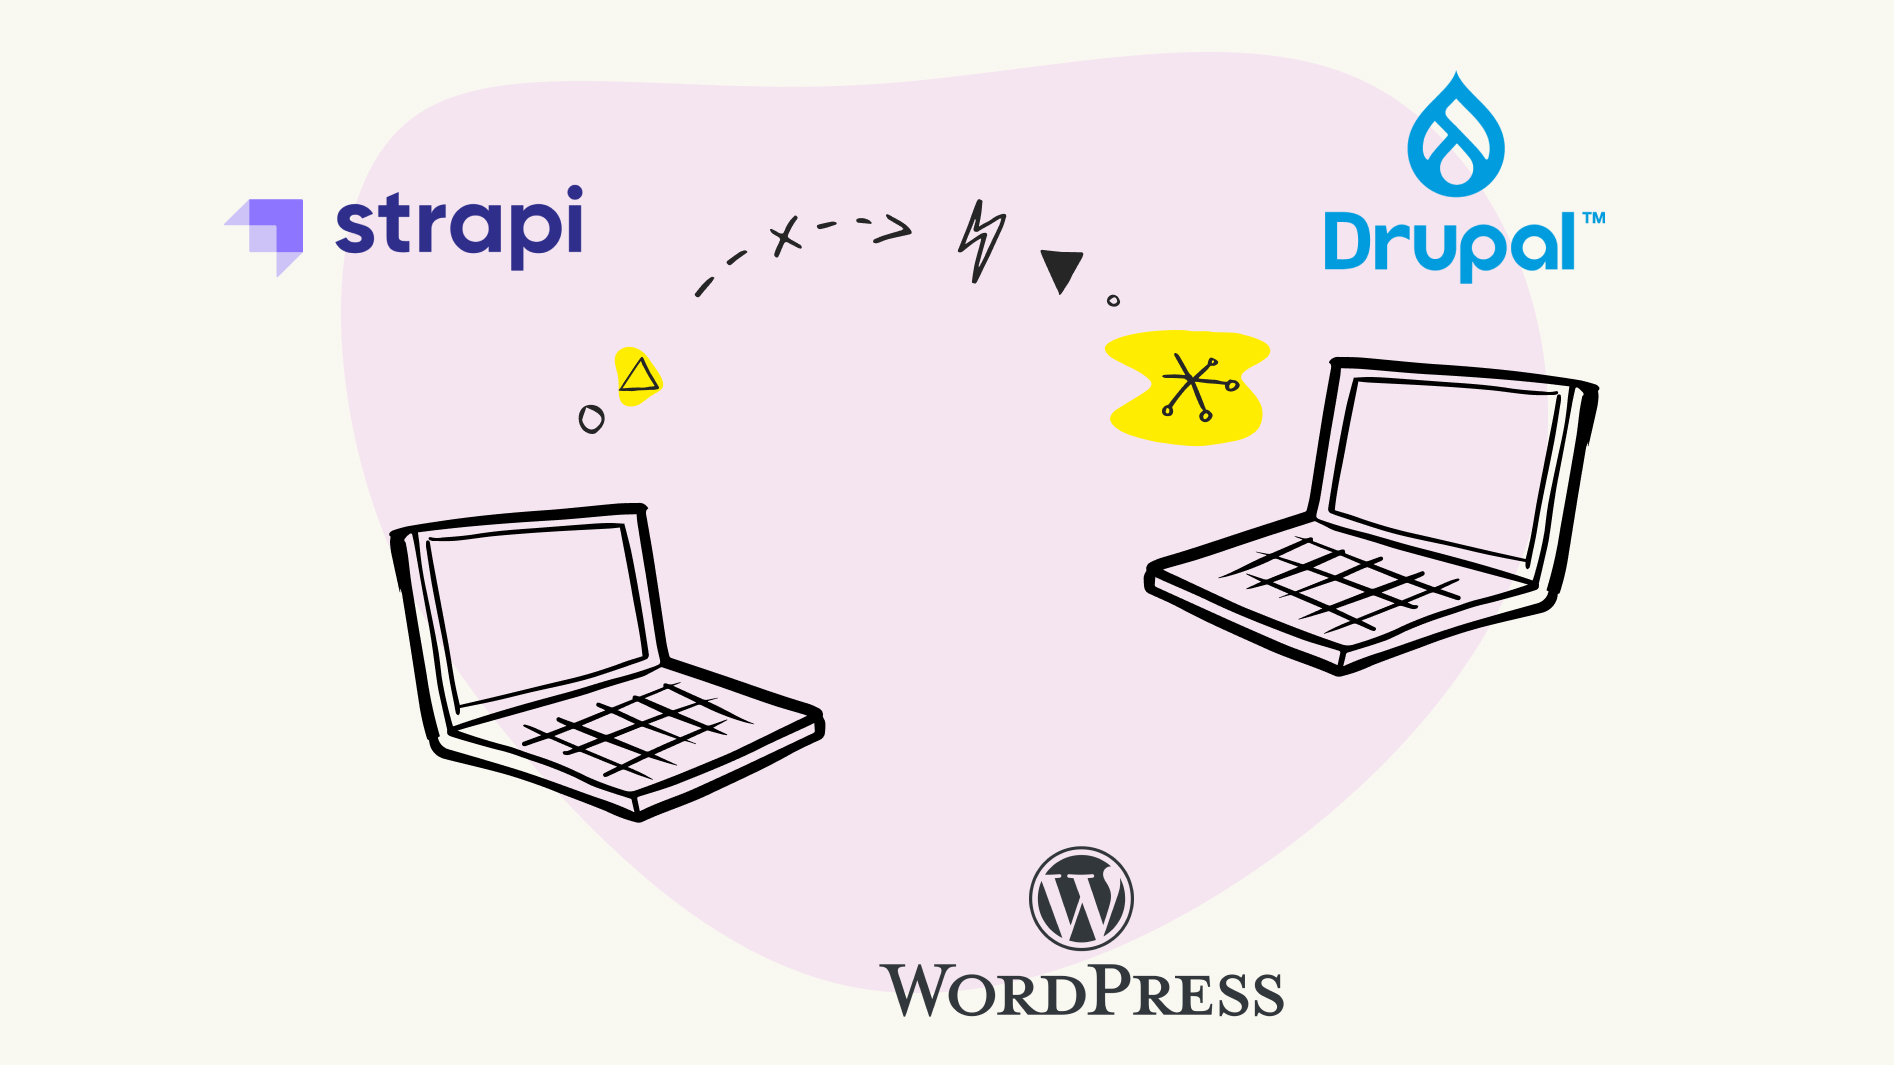 A minimalist infographic showing two laptops with respective icons floating above them, depicting data transfer or migration. The left laptop has a Strapi logo, and the right laptop features a Drupal logo, with a WordPress logo in between on a background blob, illustrating a process of CMS integration or migration.